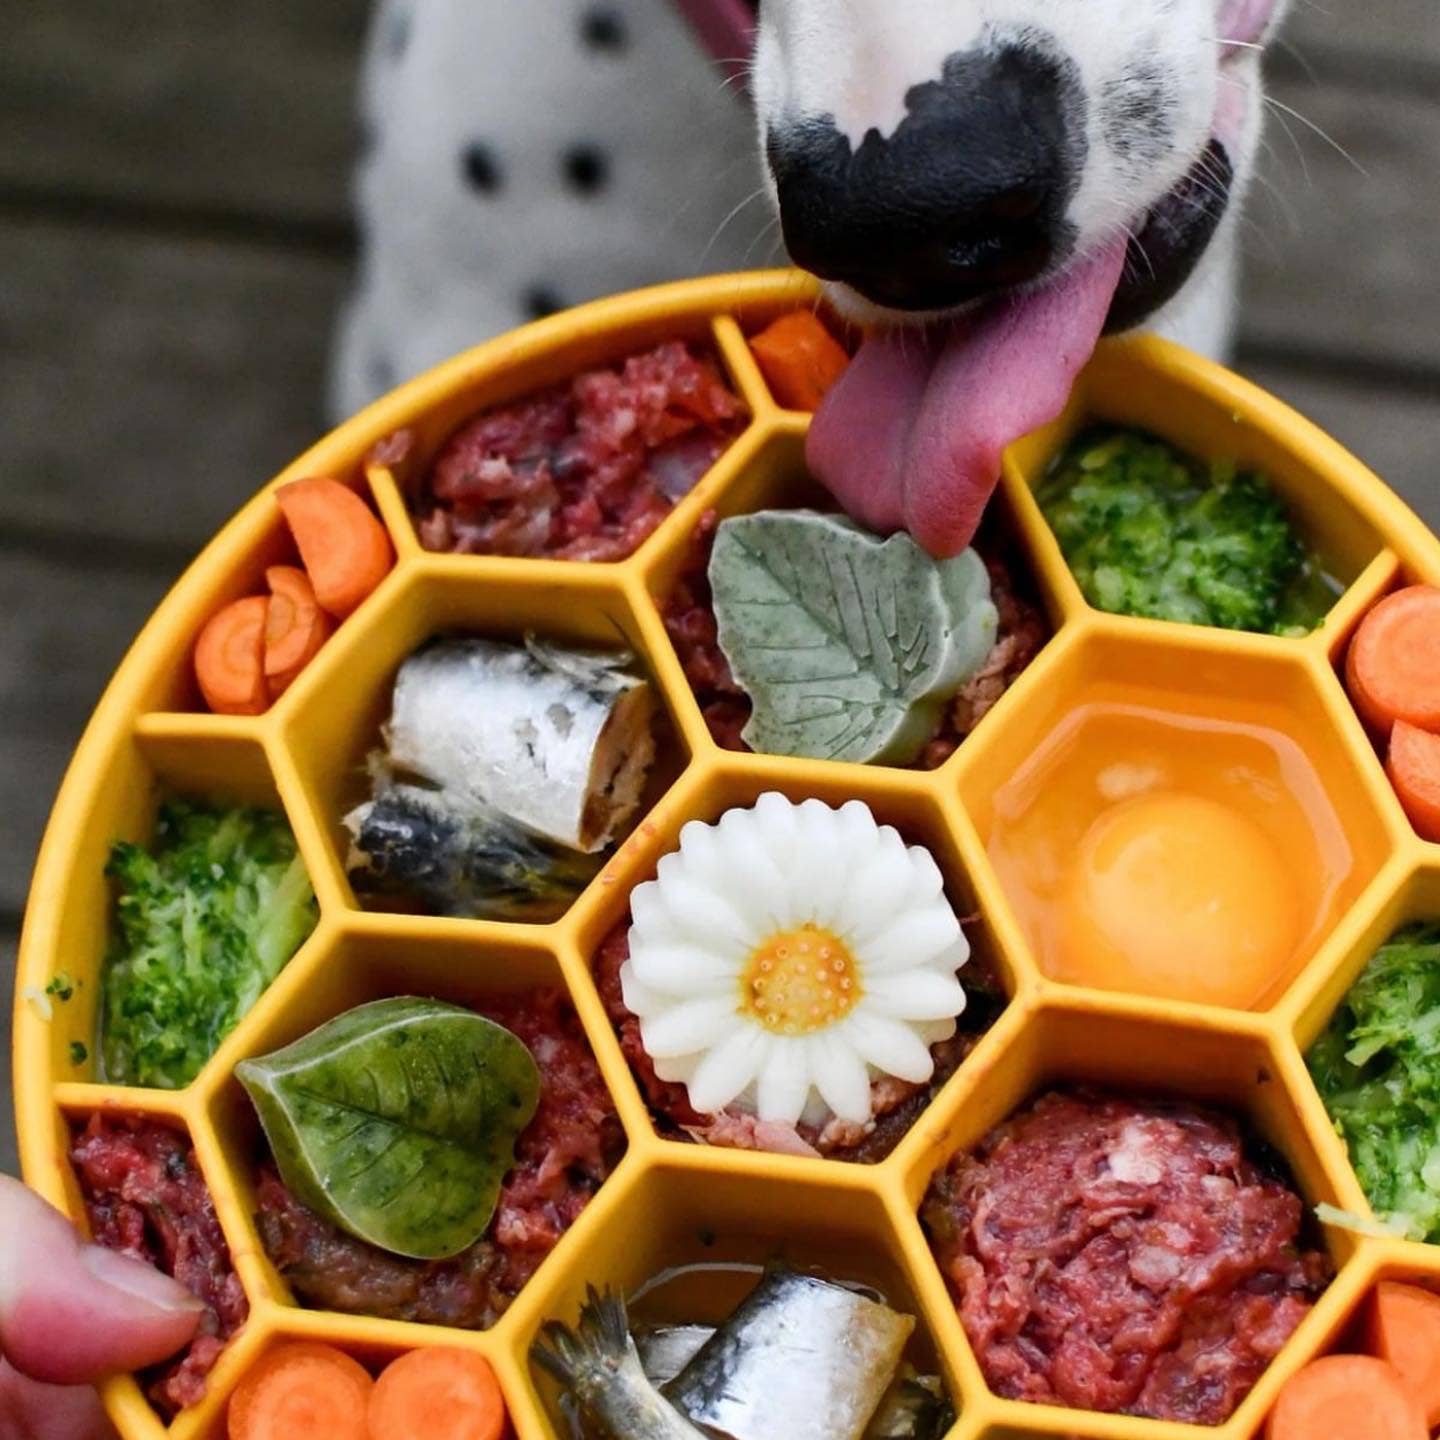 Honeycomb Slow Feeder Bowl for Dogs - Yellow| Dog Enrichment Feeder | Honeycomb Design eBowl Enrichment Slow Feeder Bowl for Dogs | SodaPup